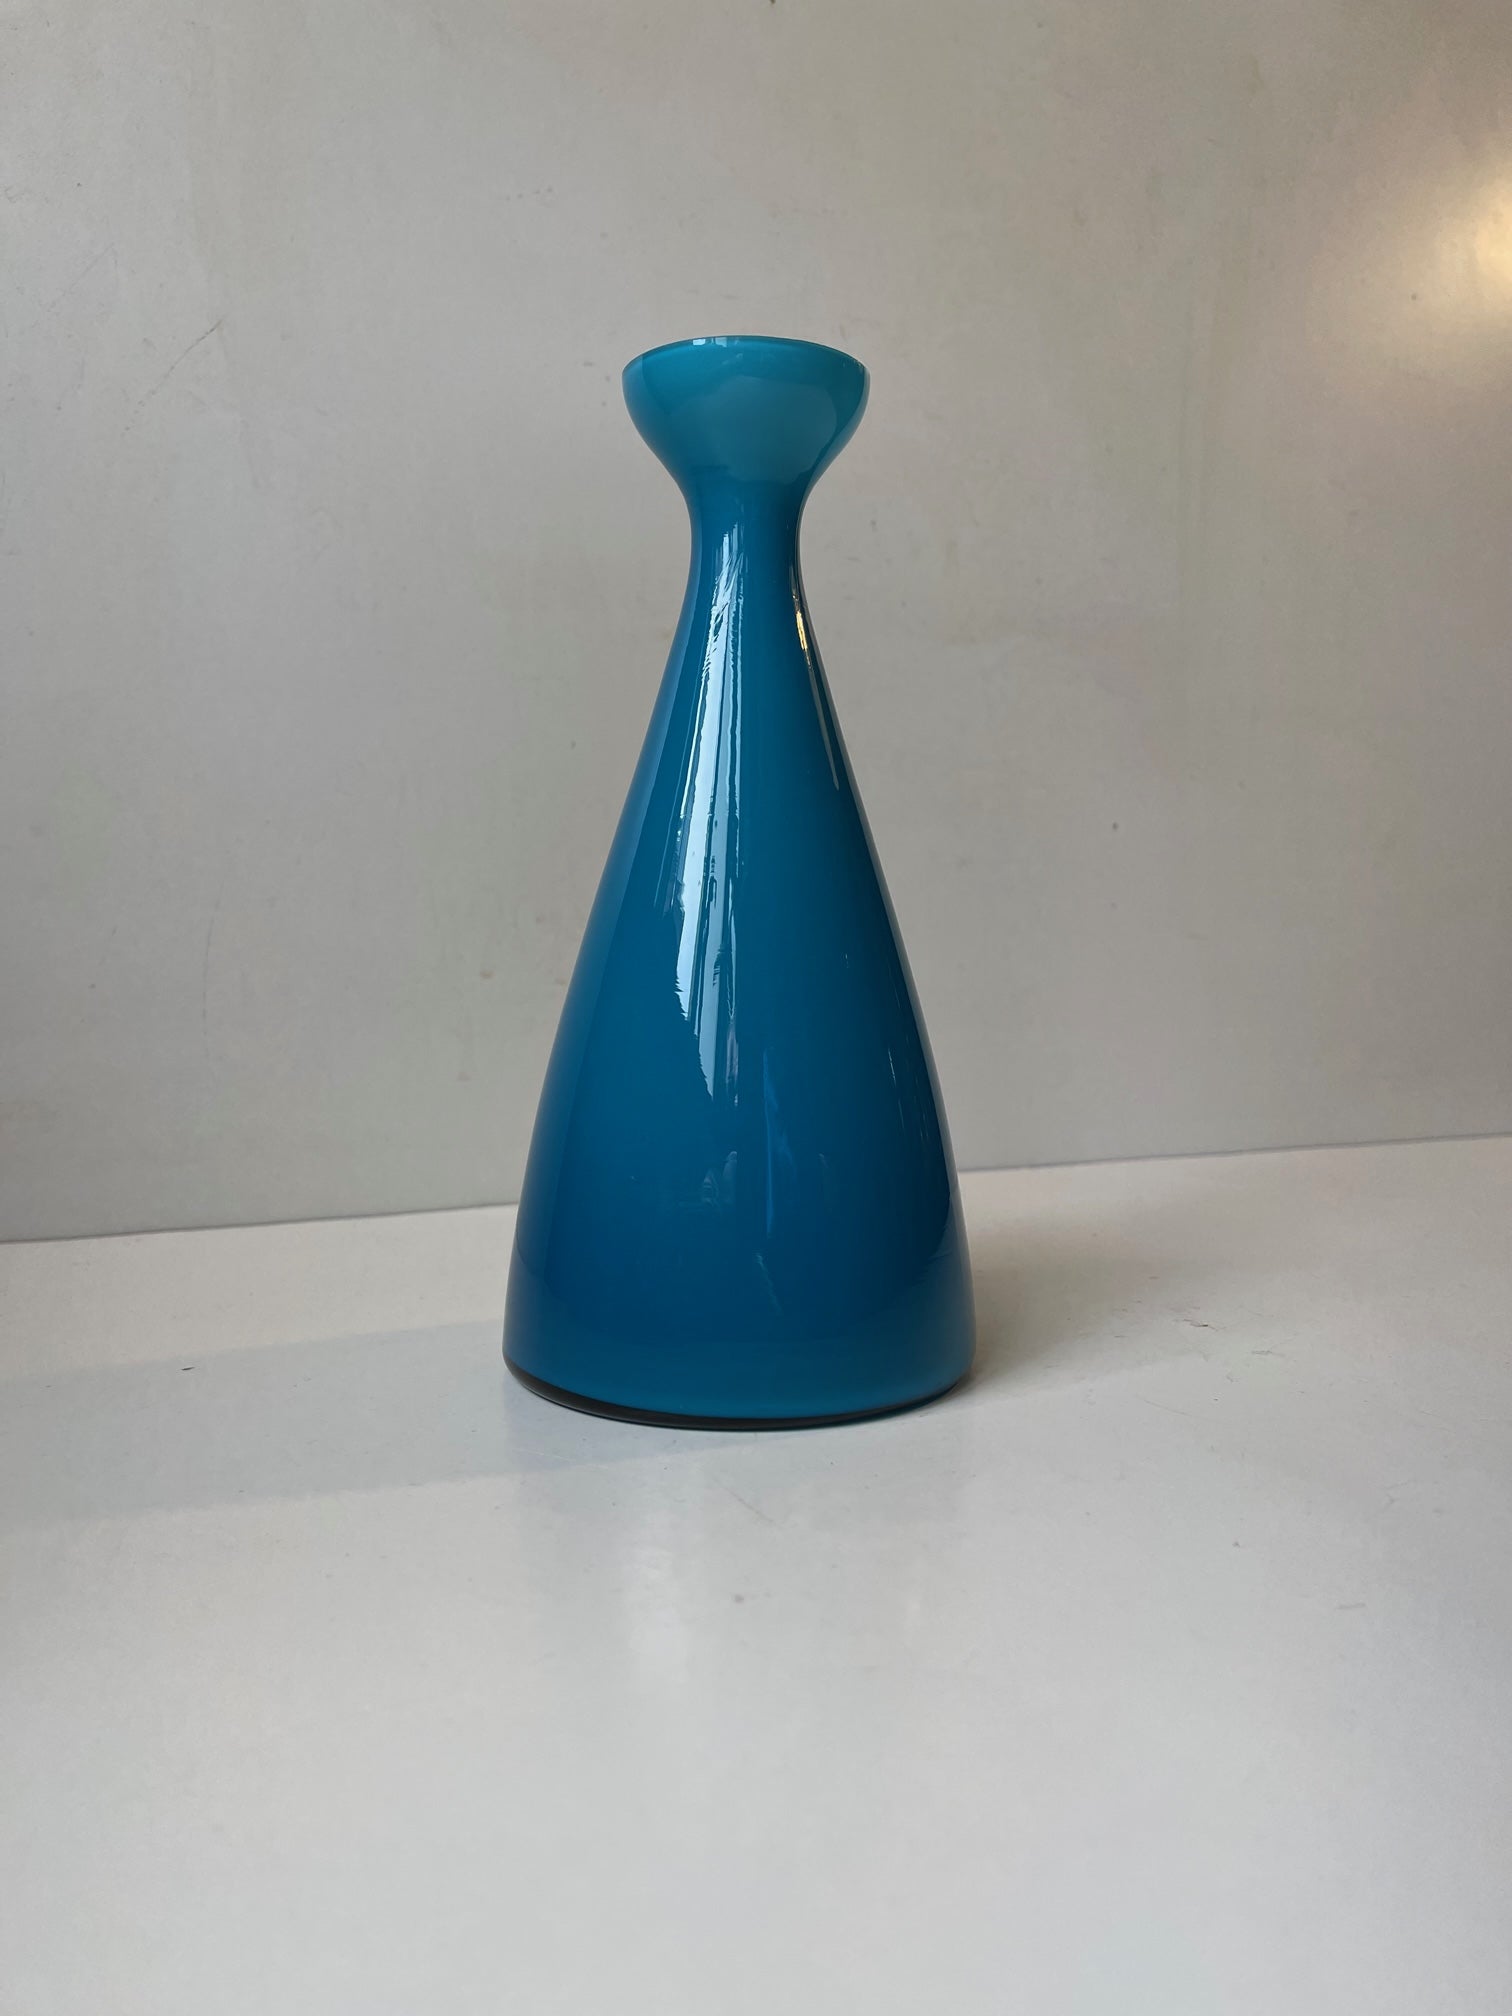 A rare teal blue cased opaline glass vase by Holmegaard, circa 1970. Probably a variation of the Carnaby series by Per Lütken. Measurements: H: 20 cm, Diameter: 10/5 cm.